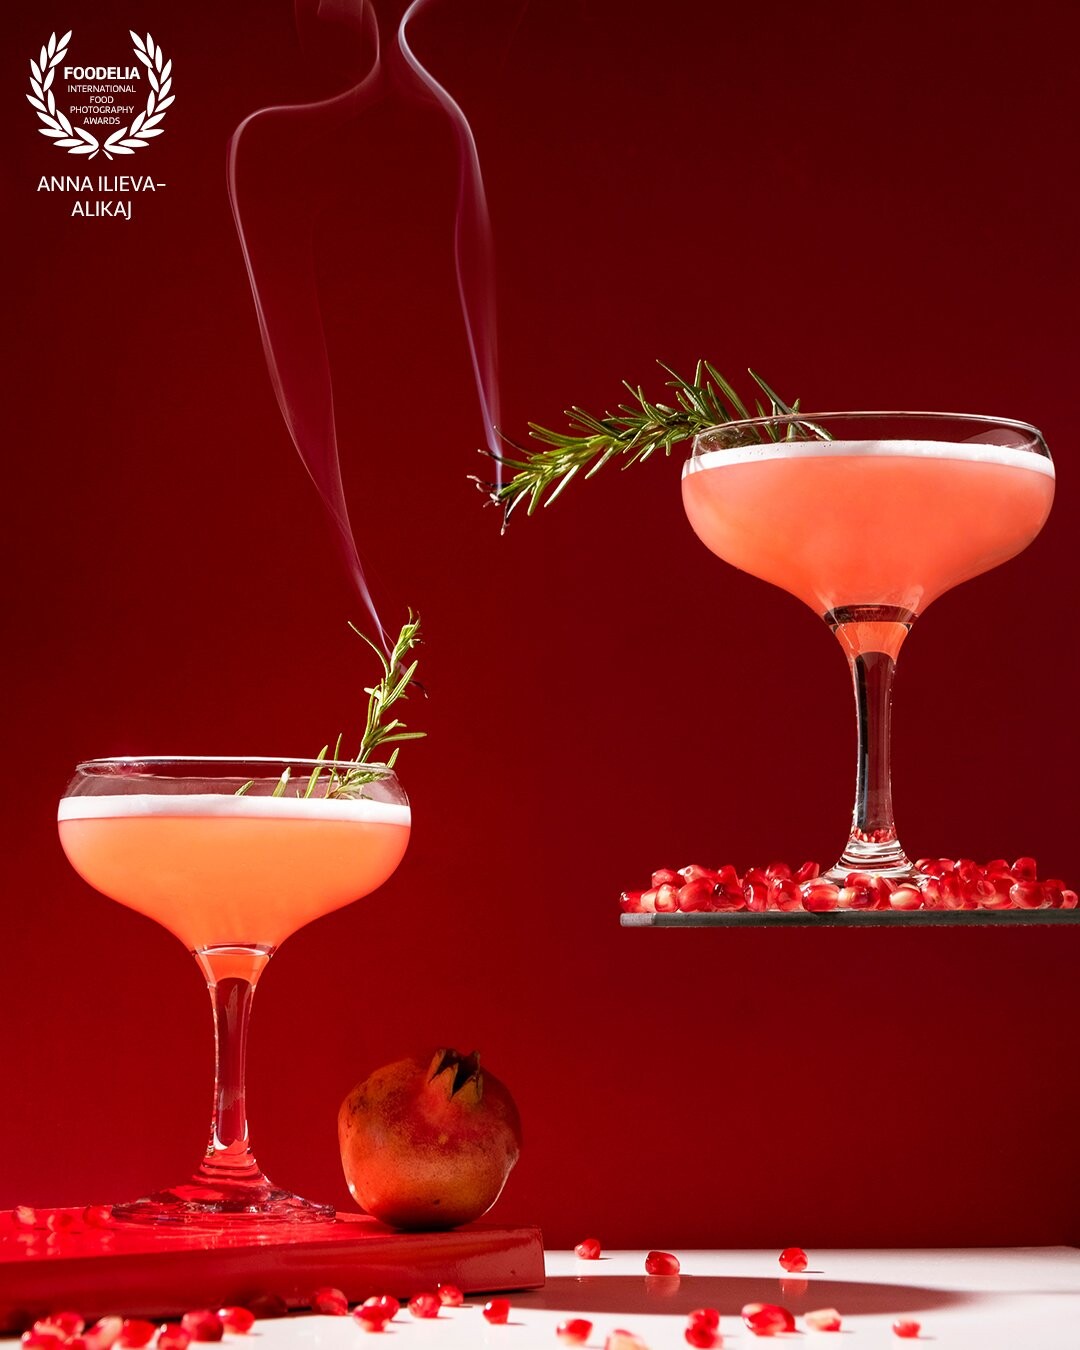 Gin fizz pomegranate cocktail - mix of gin, lime and pomegranate juice, plus decoration with egg white foam which technically makes the cocktail "royal". And my personal touch - the steaming rosemary. It is really easy to prepare even at home, just be very careful with the freshness and the origin of the eggs.